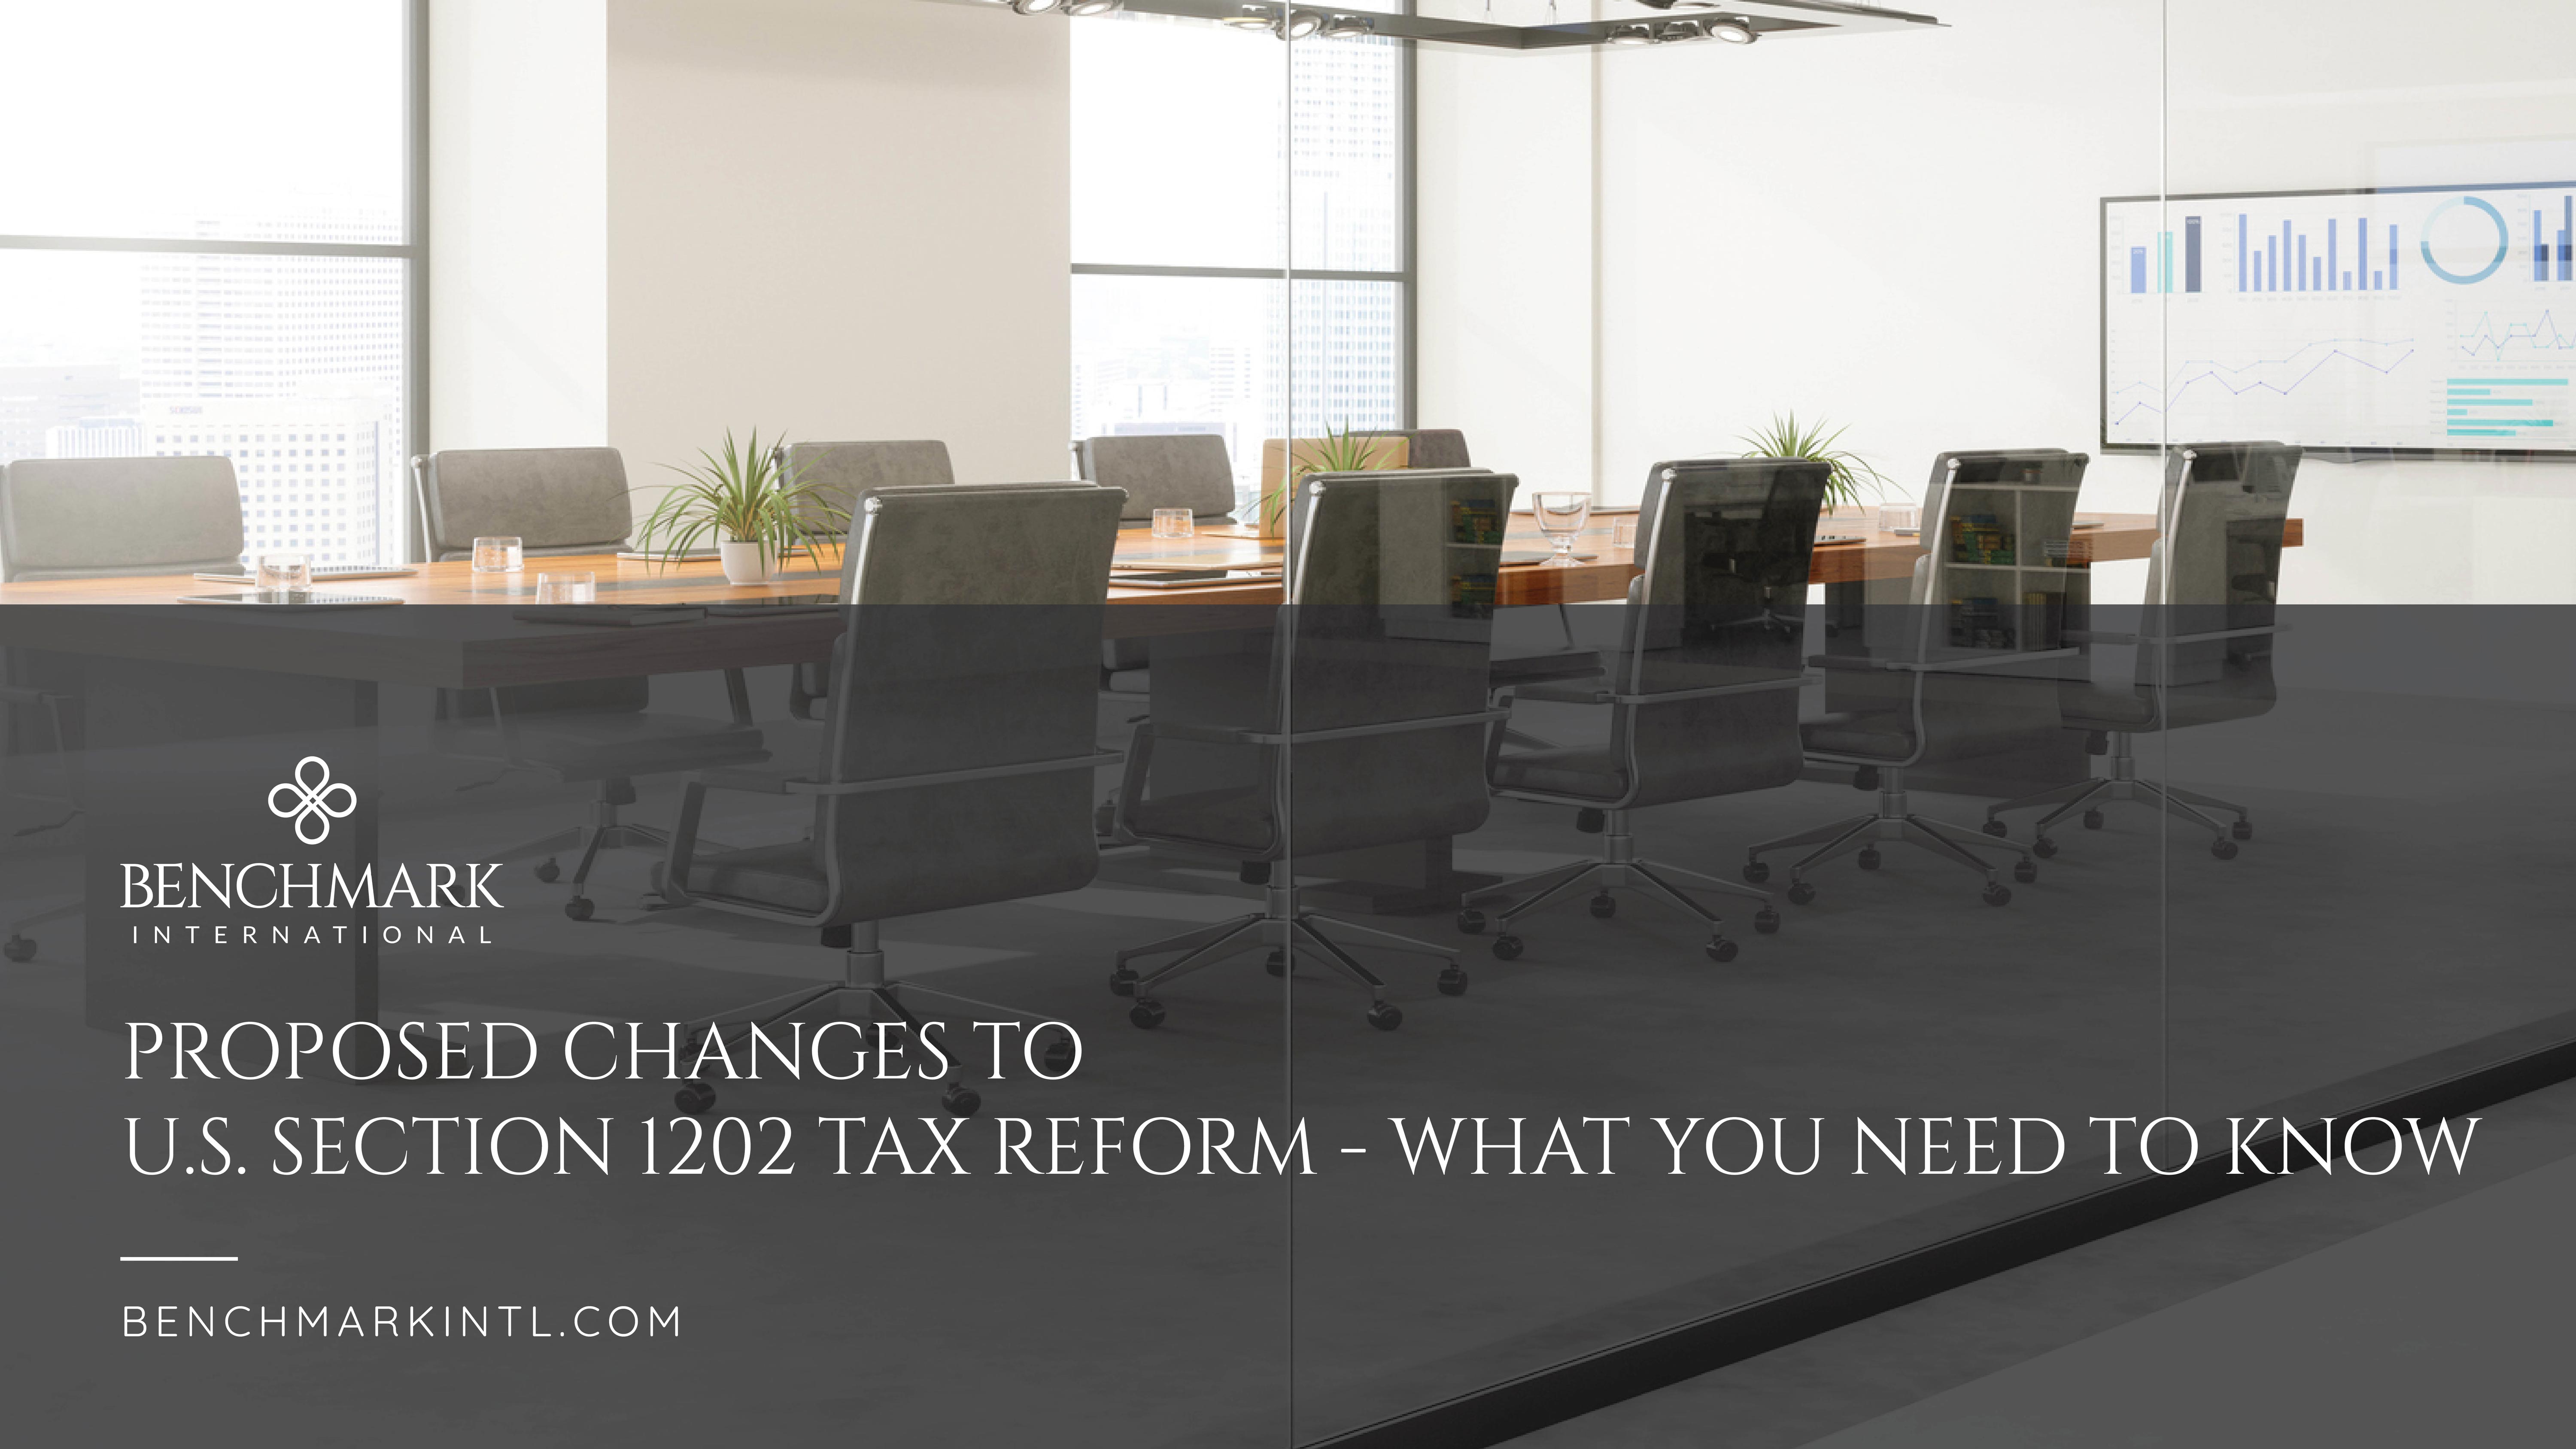 Proposed Changes to U.S. Section 1202 Tax Reform: What You Need to Know